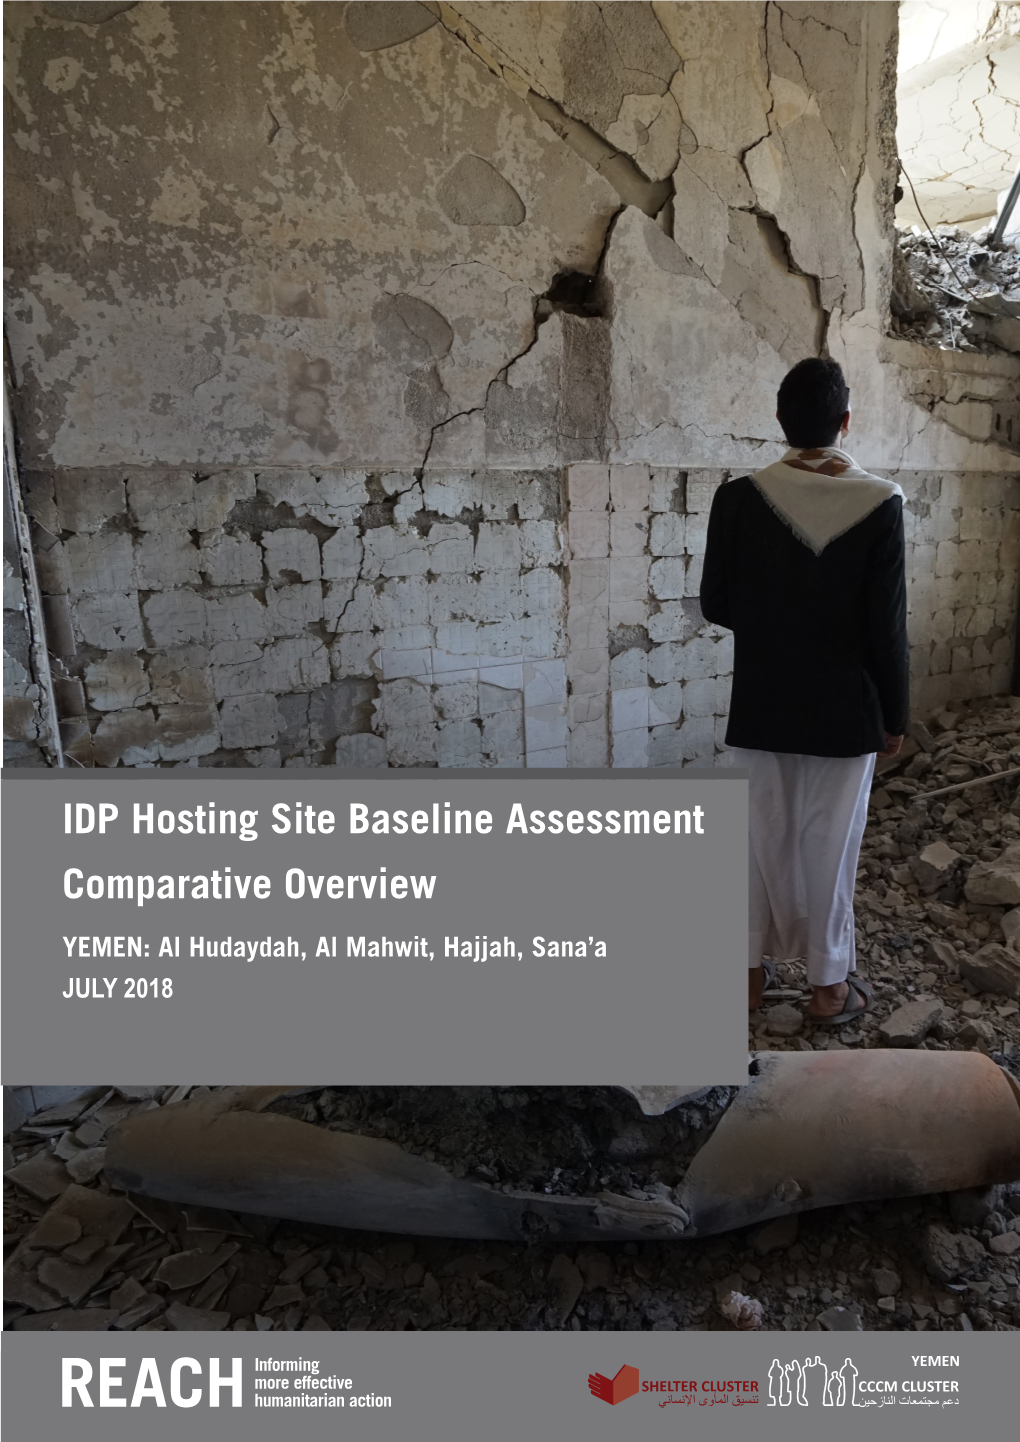 IDP Hosting Site Baseline Assessment Comparative Overview